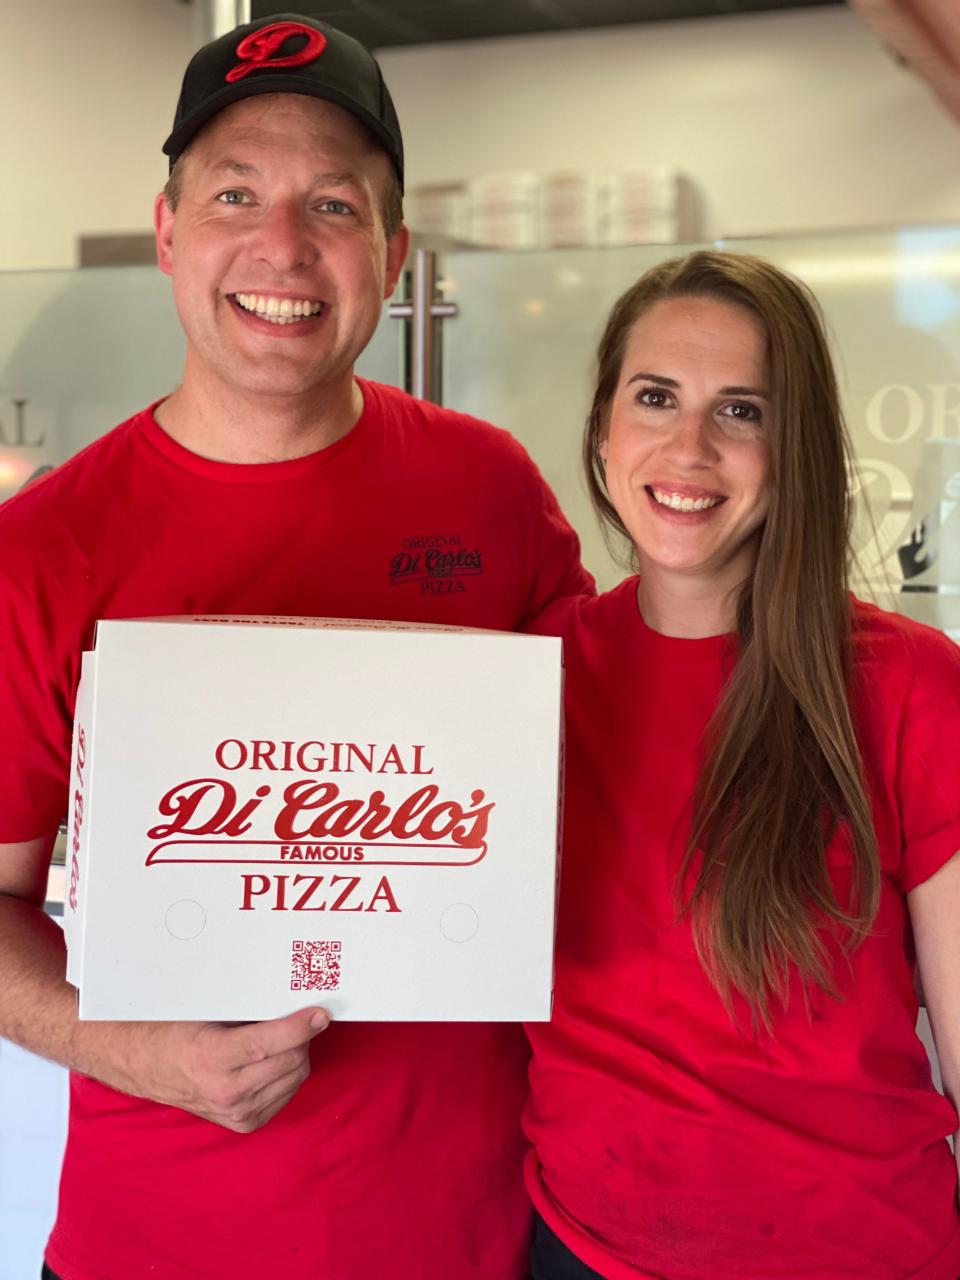 Michael and Sarah Carlson are scheduled for a grand-opening celebration at DiCarlo’s Pizza, 20 S. State St,. on July 1.